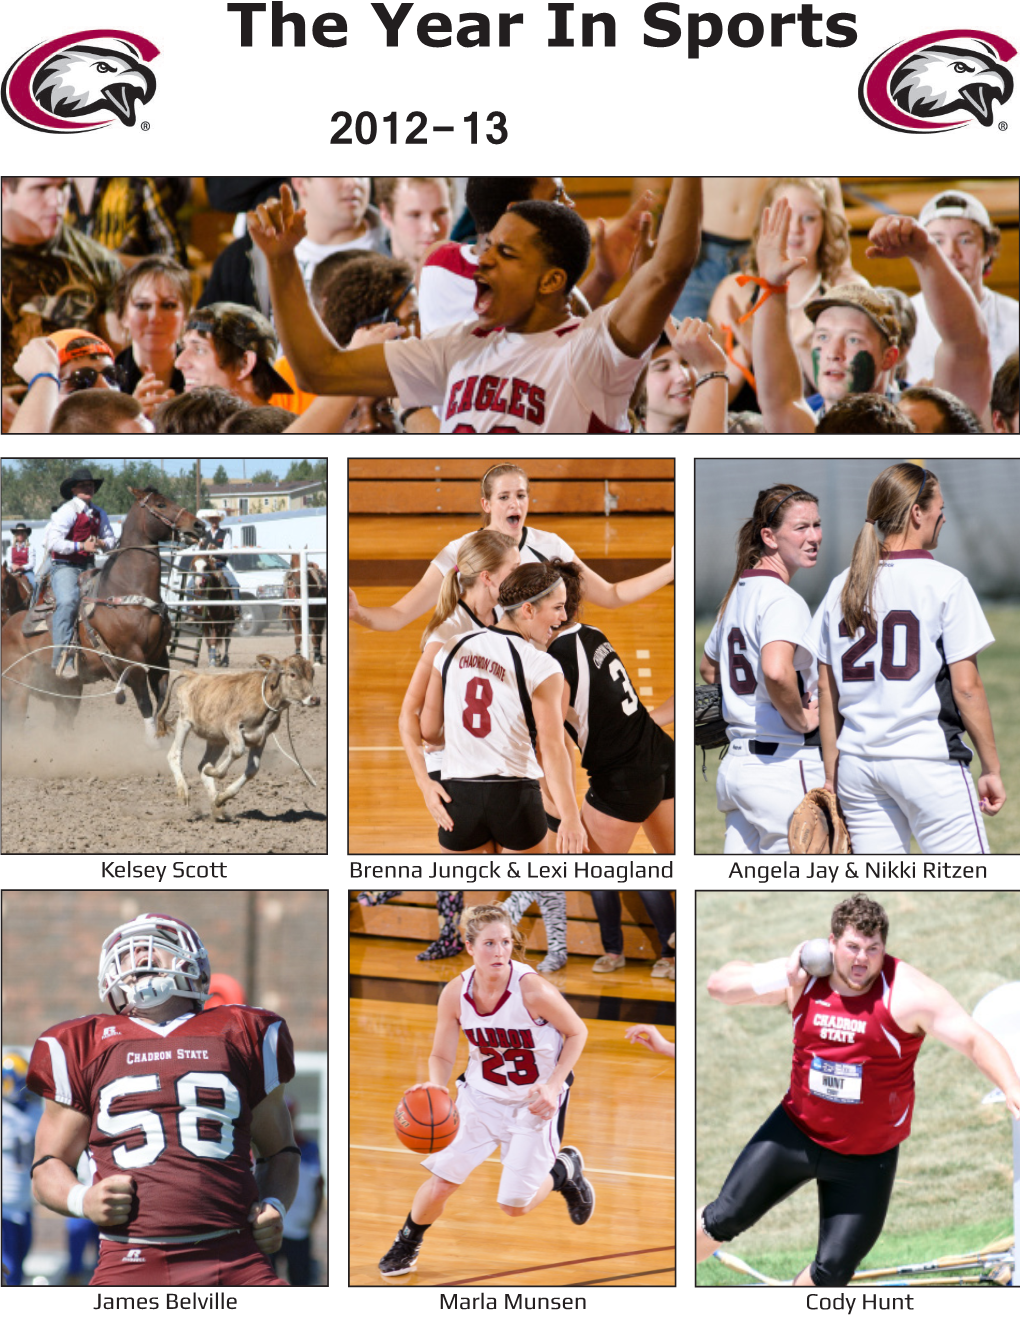 The Year in Sports 2012-13